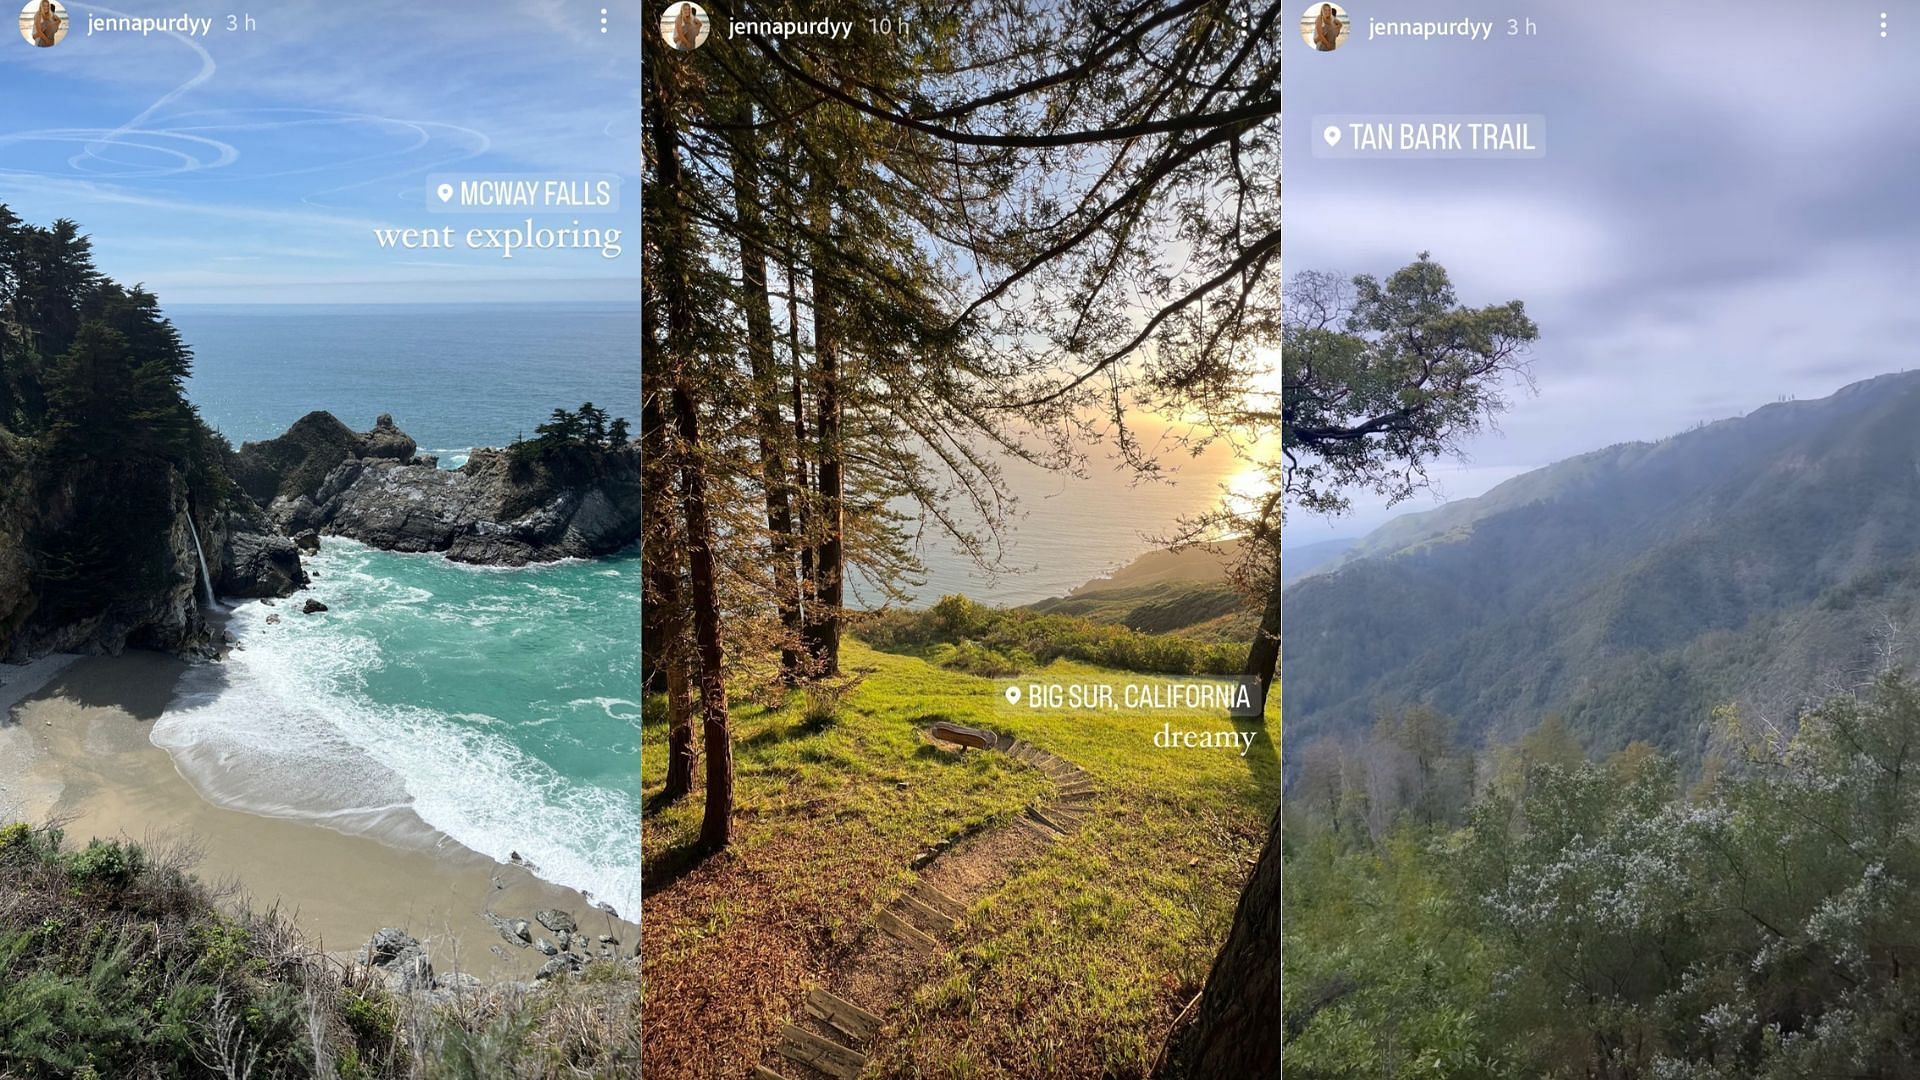 Jenna Purdy shared some views from Big Sur, which she and Brock Purdy recently visited.